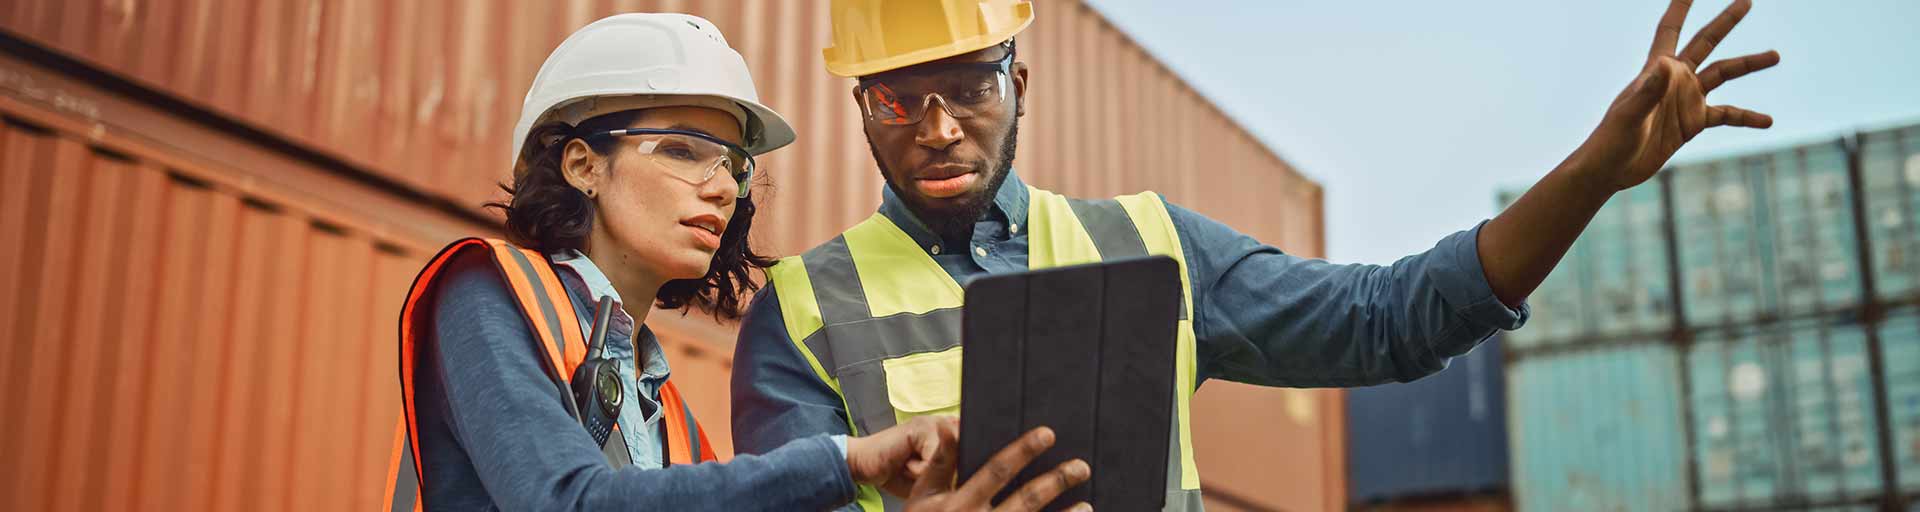 Two people looking to tablet in a worksite